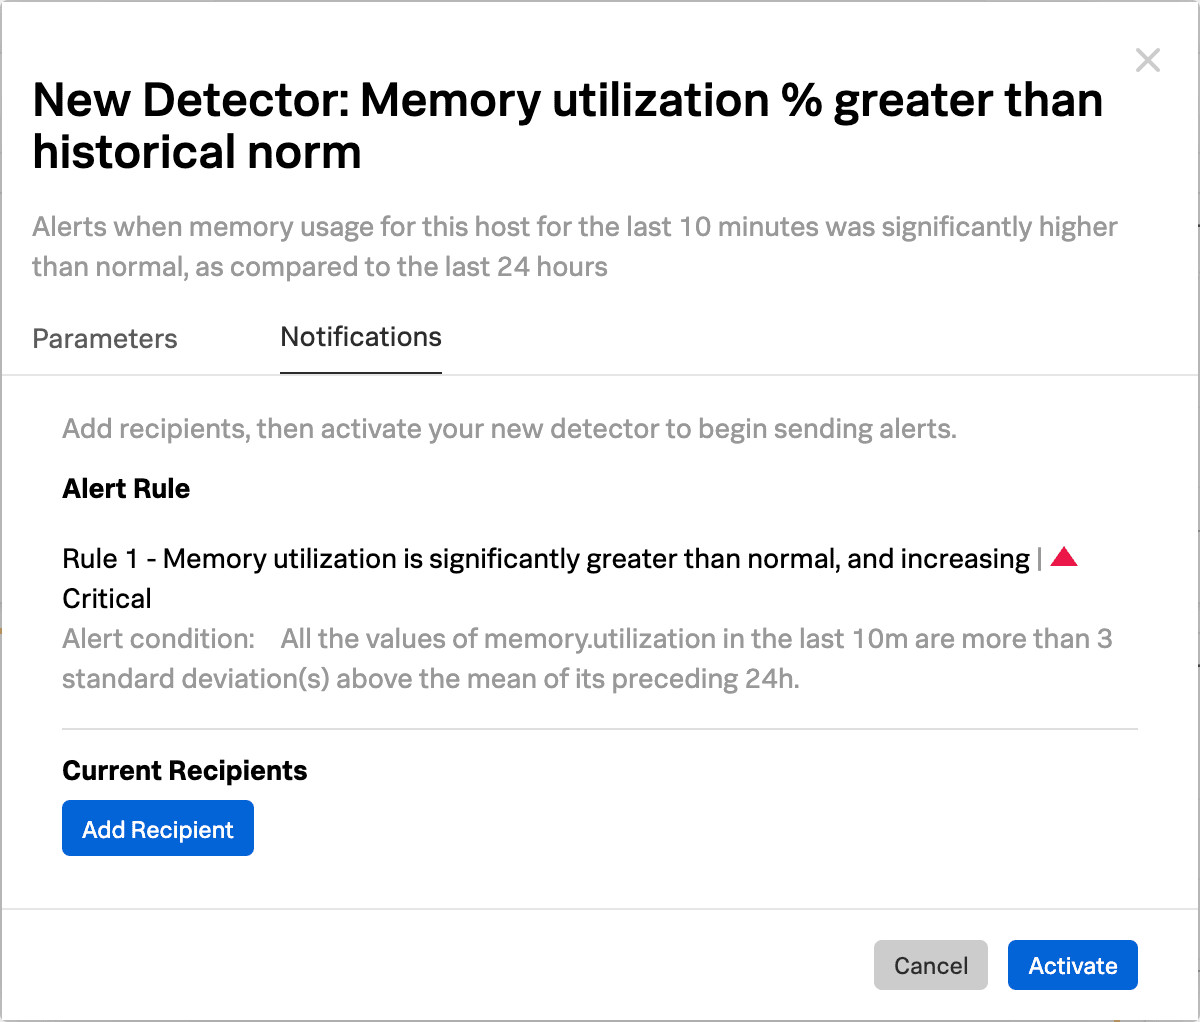 This screenshot shows the New Detector: Memory utilization % greater than historical norm detector template.